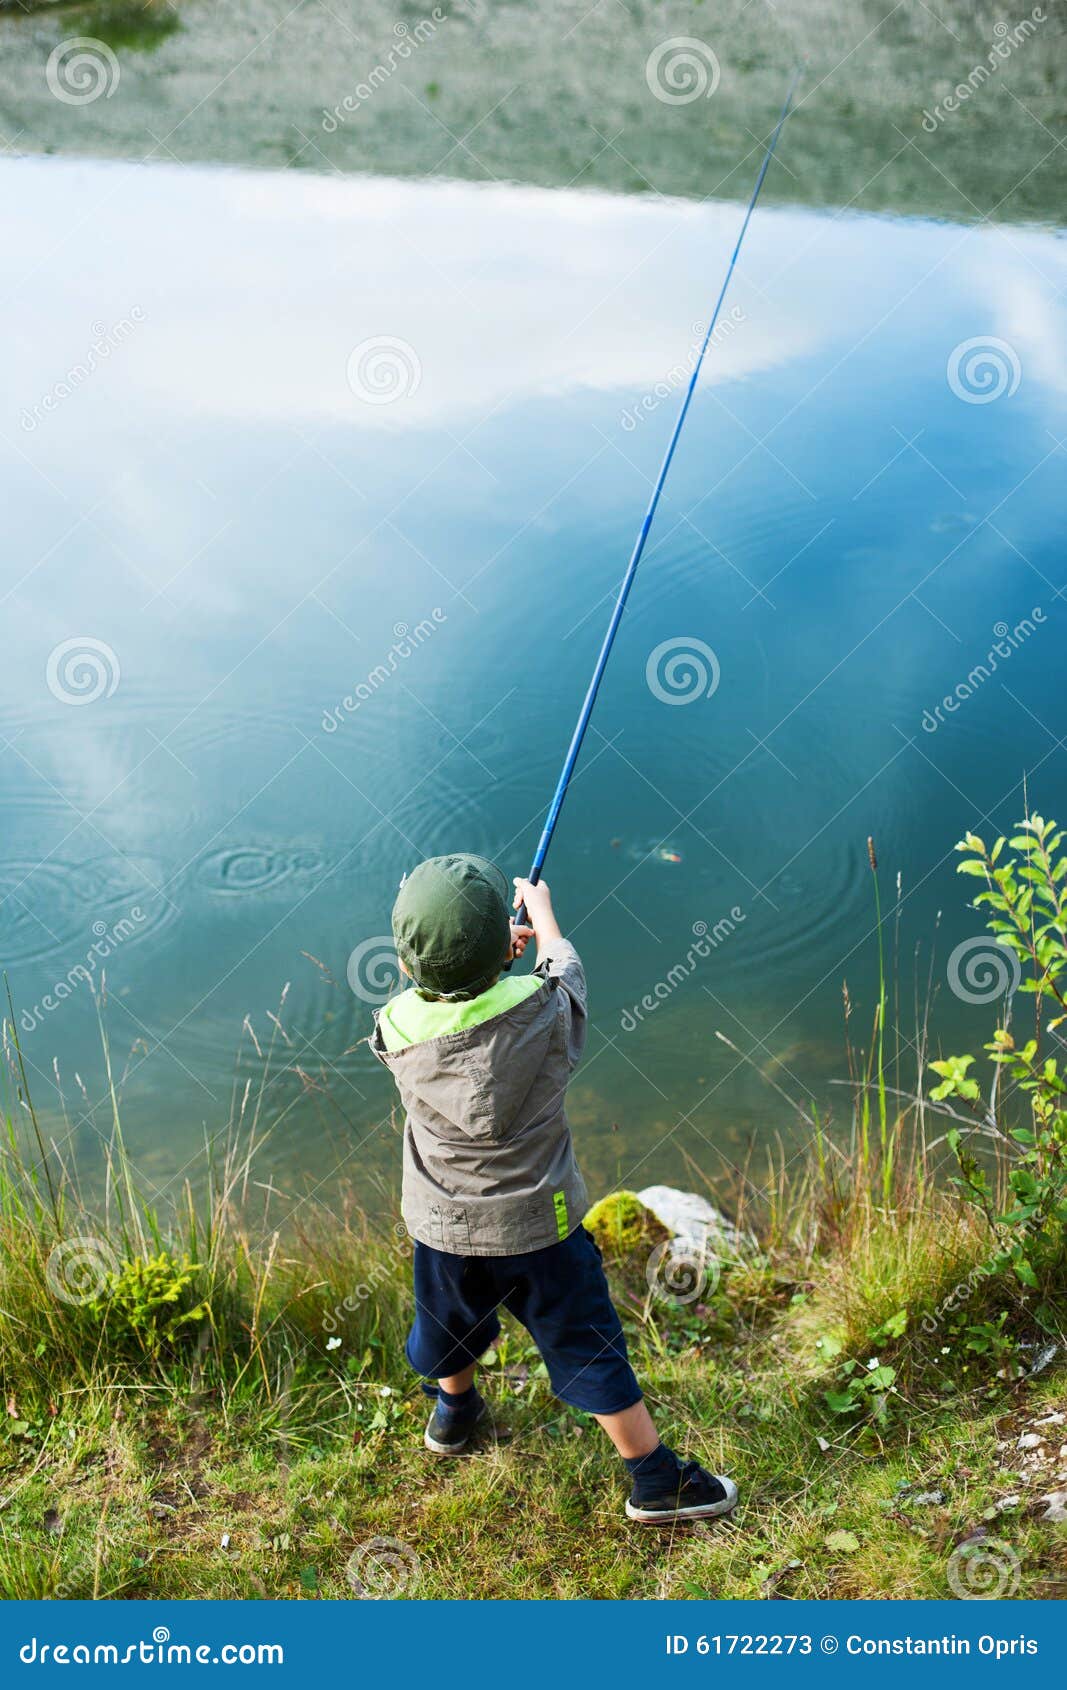 https://thumbs.dreamstime.com/z/young-boy-fishing-pole-standing-banks-river-holding-61722273.jpg